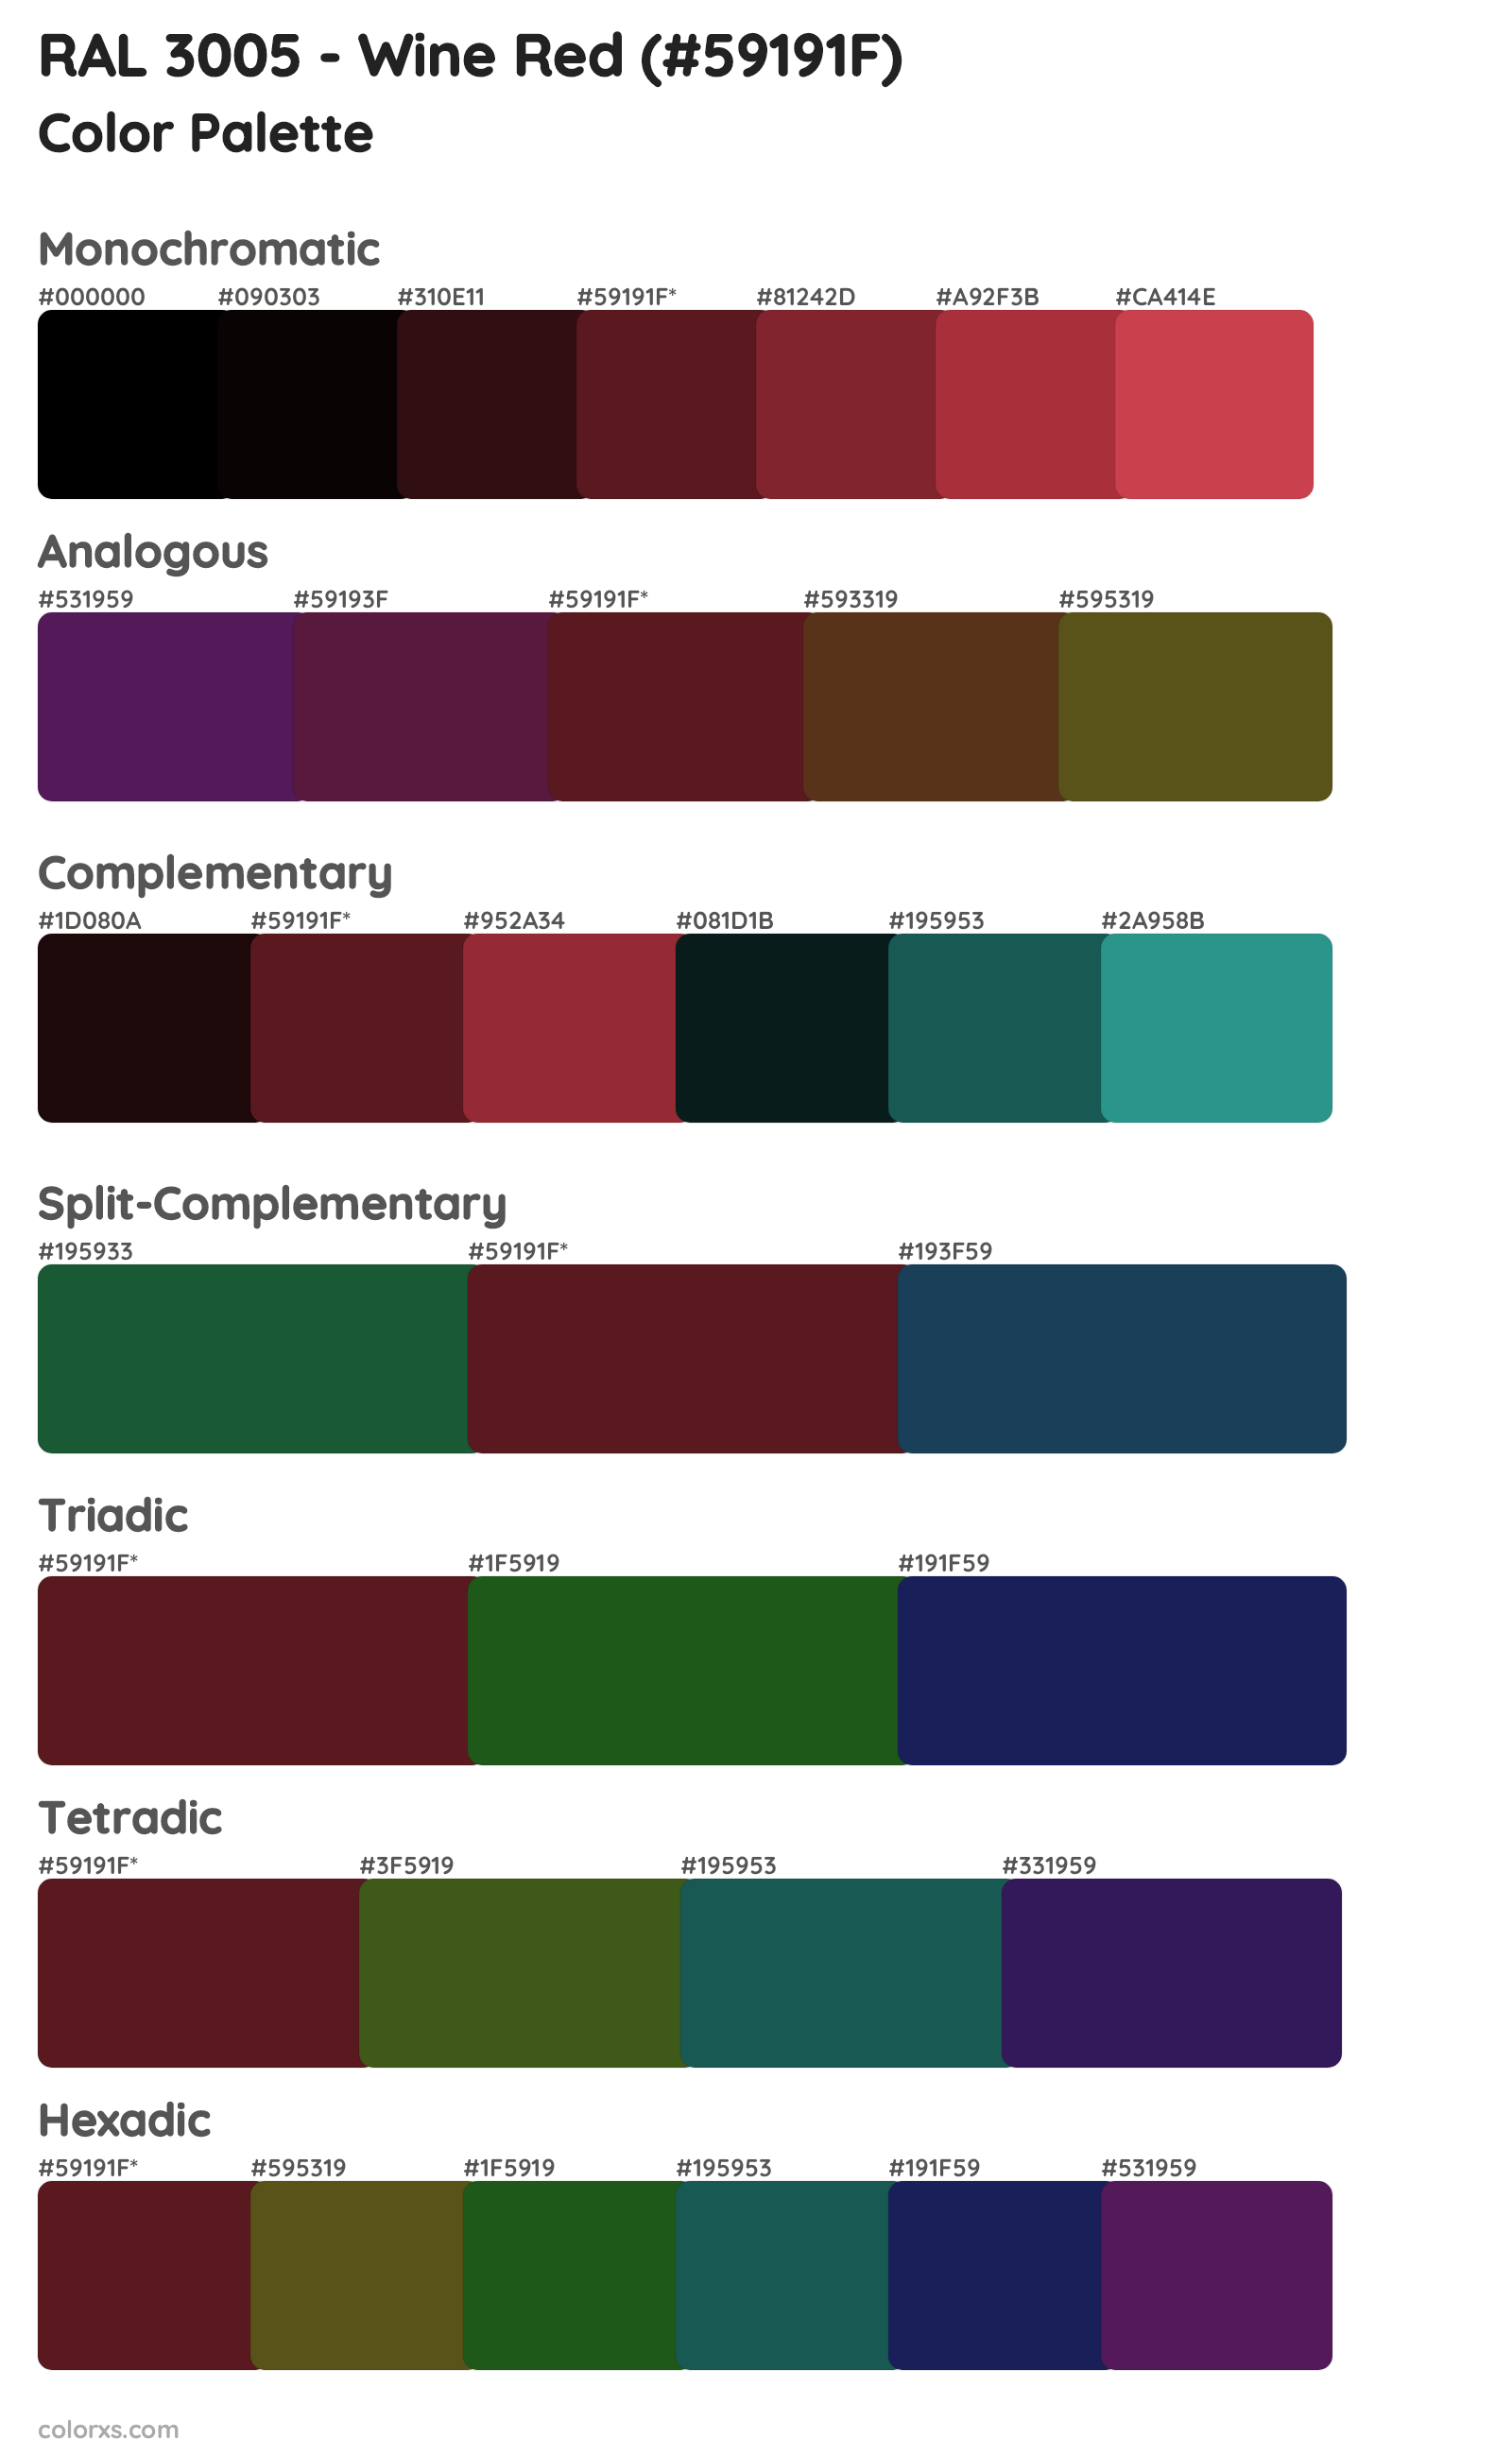 RAL 3005 - Wine Red Color Scheme Palettes